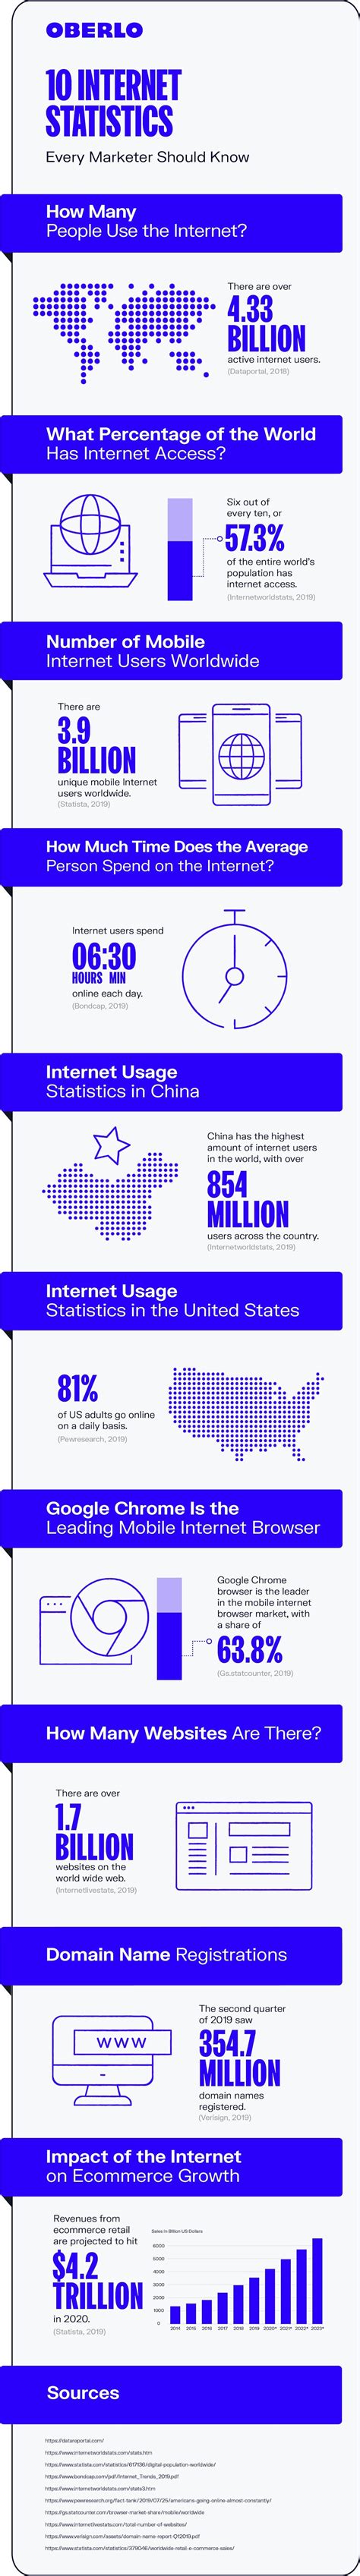 10 Internet Statistics Every Marketer Should Know In 2021 Infographic